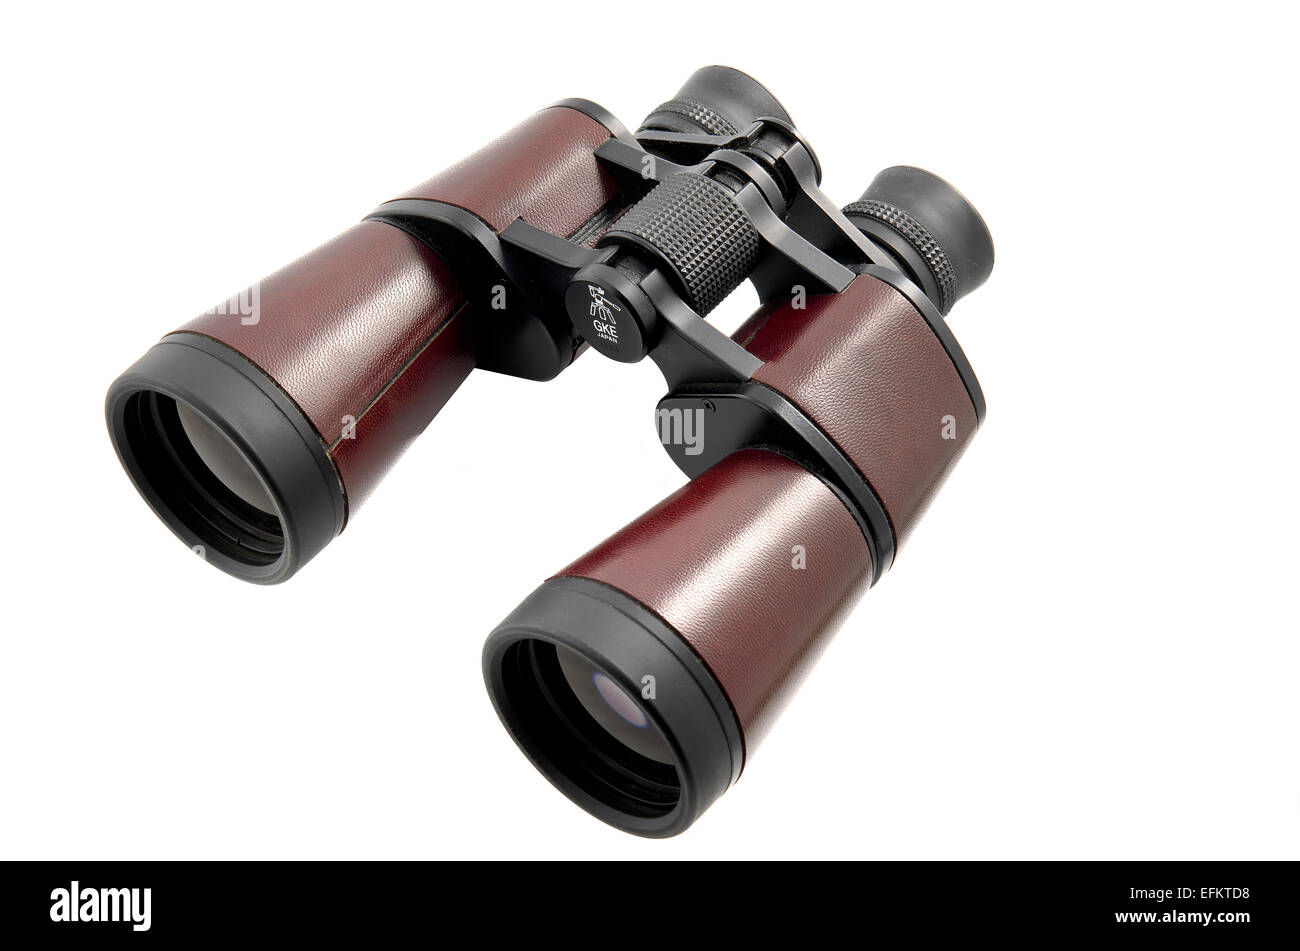 cut out of a pair of binoculars Stock Photo